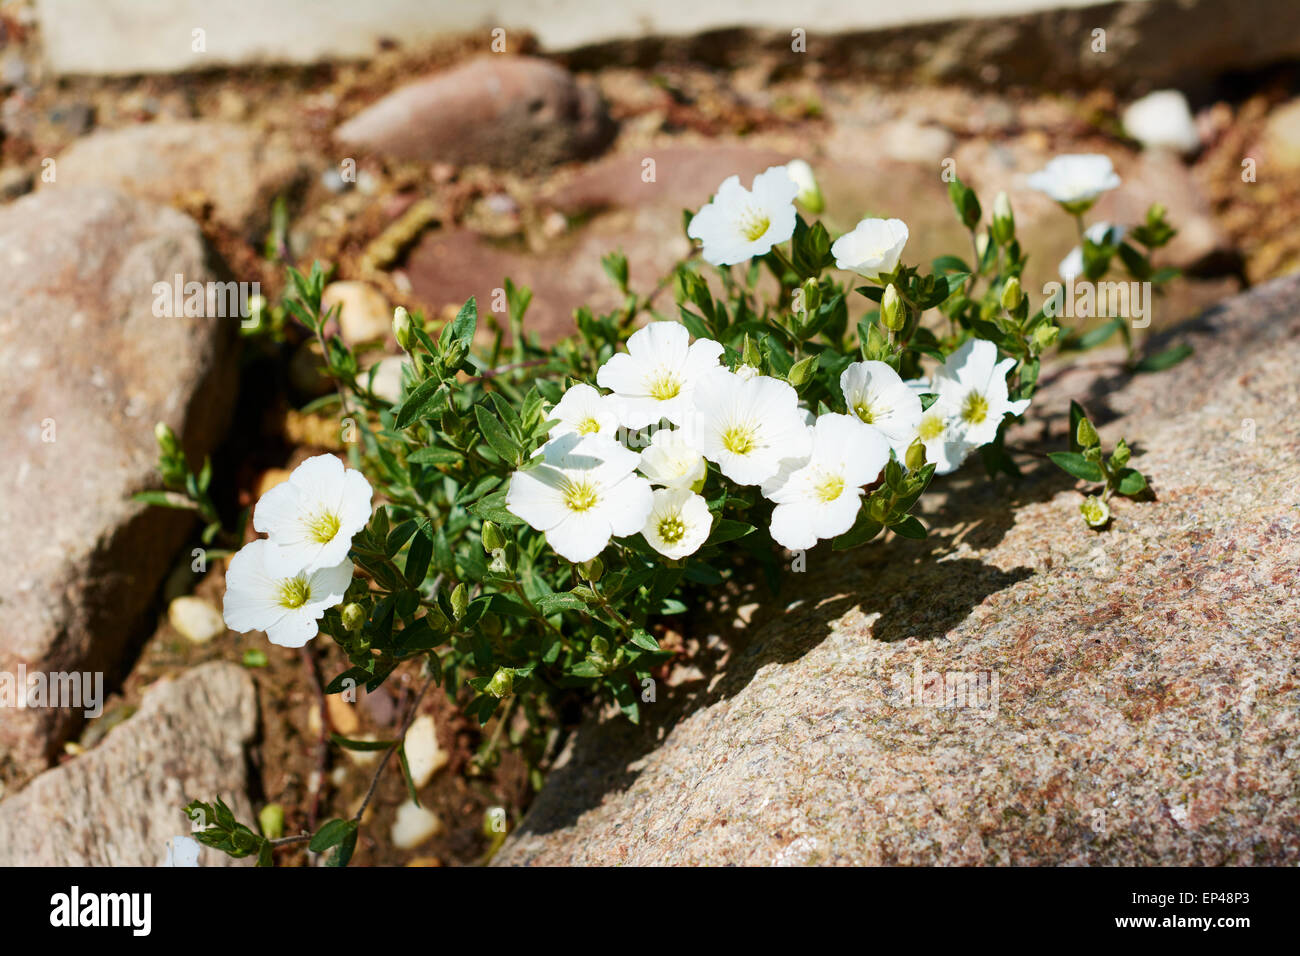 Arenaria montana (Mountain sandwort) flowering in a garden on the edge of a pond. Stock Photo